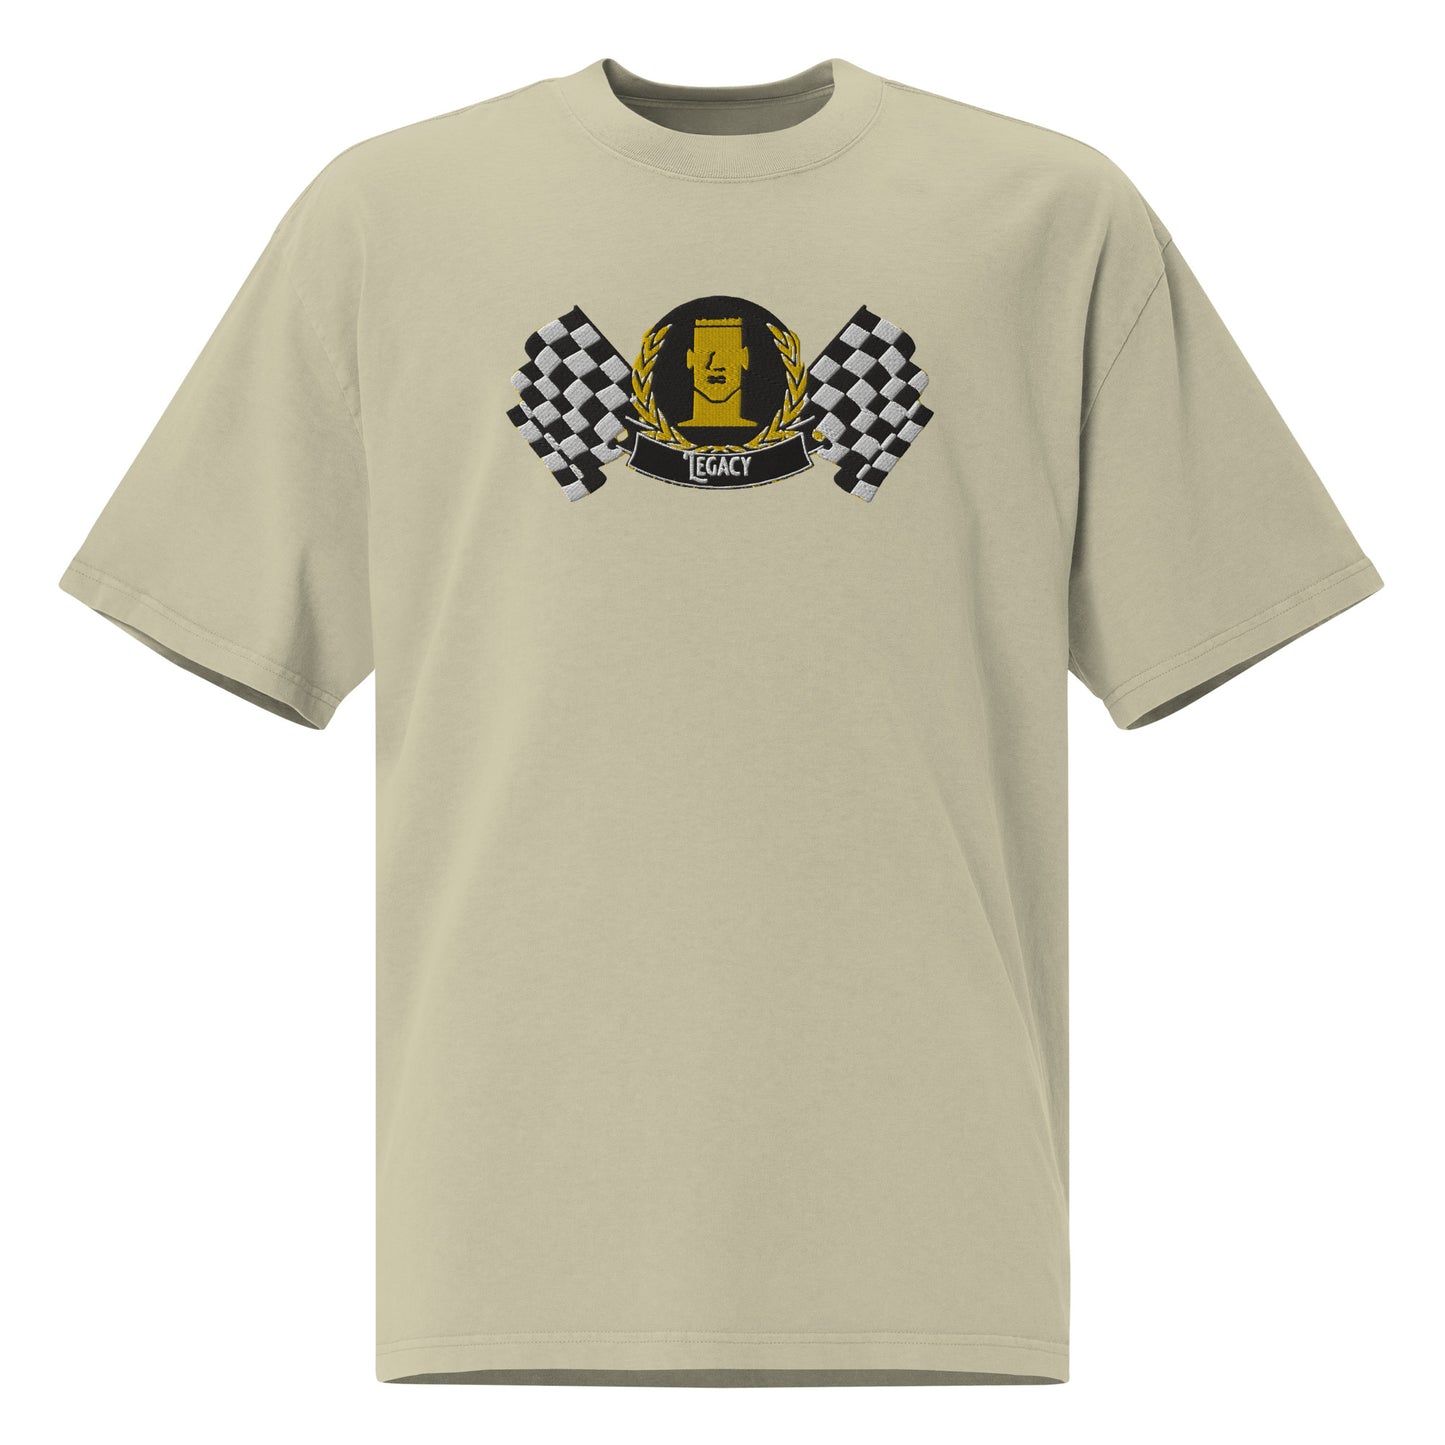 New Heritage Legacy T-shirt